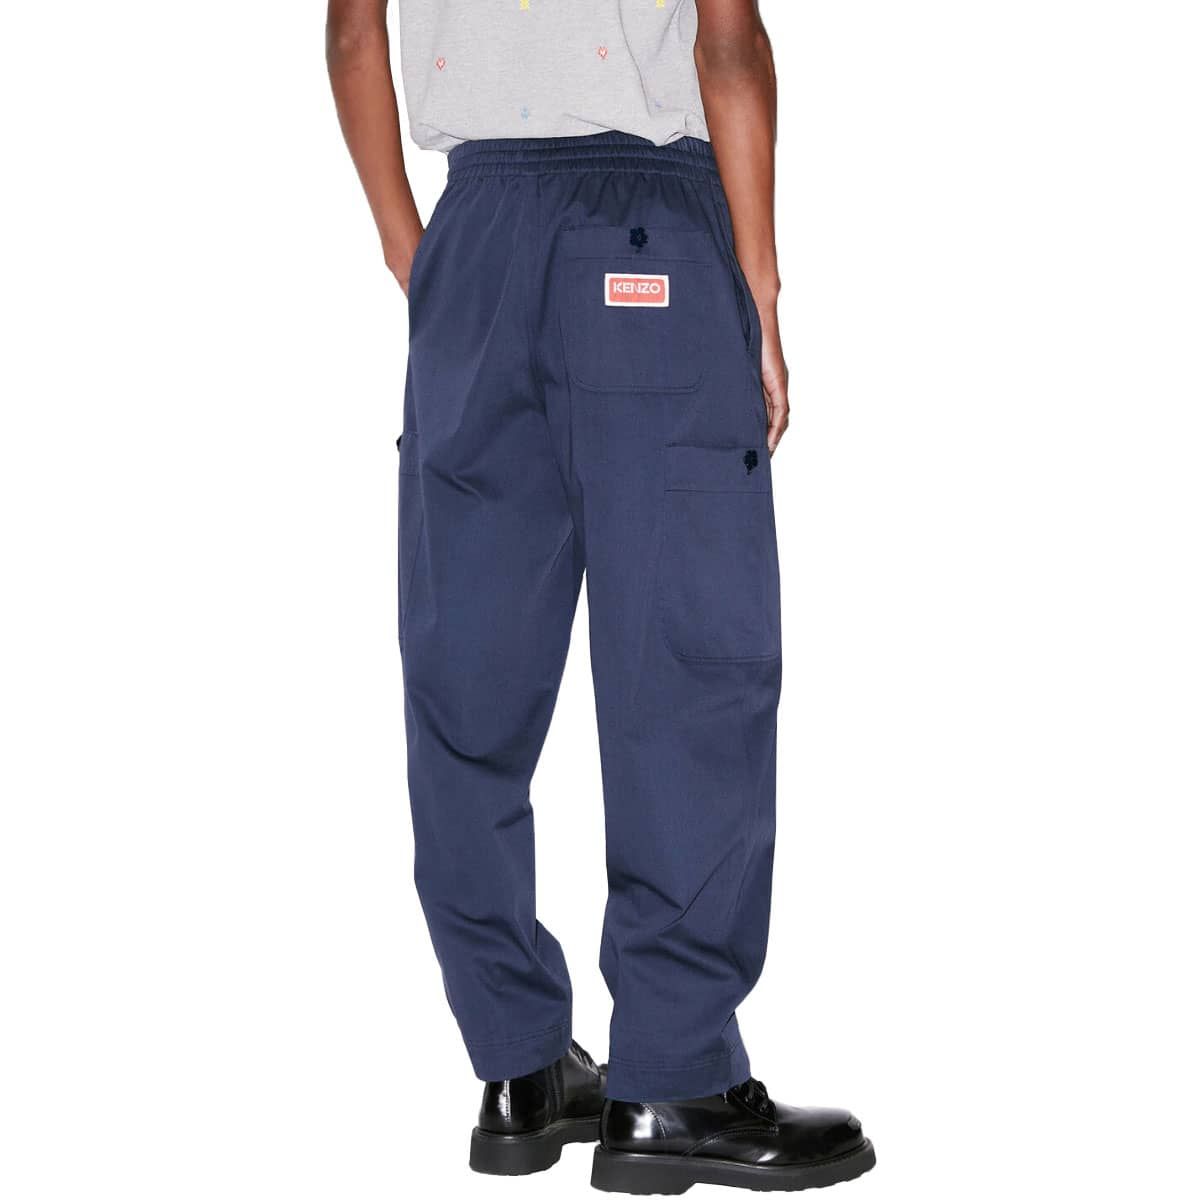 Cargo Jogging Trousers Blue Navy